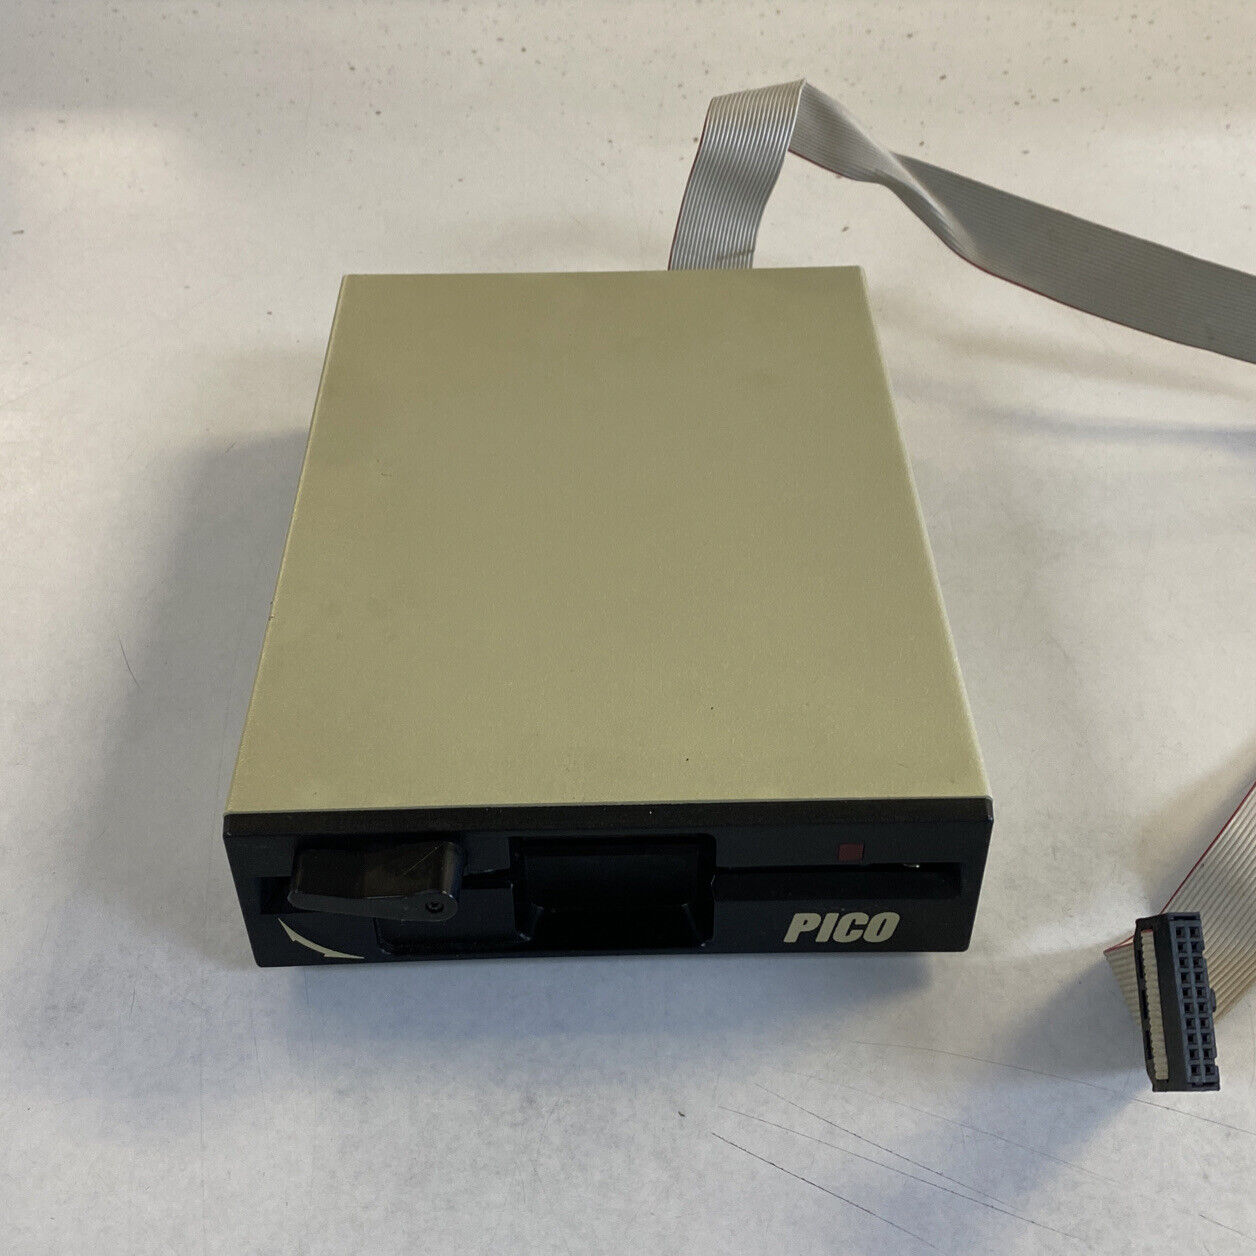 Vintage PICO 5 1/4 Floppy Direct Drive for Apple Computer Untested LDD I O3SSA